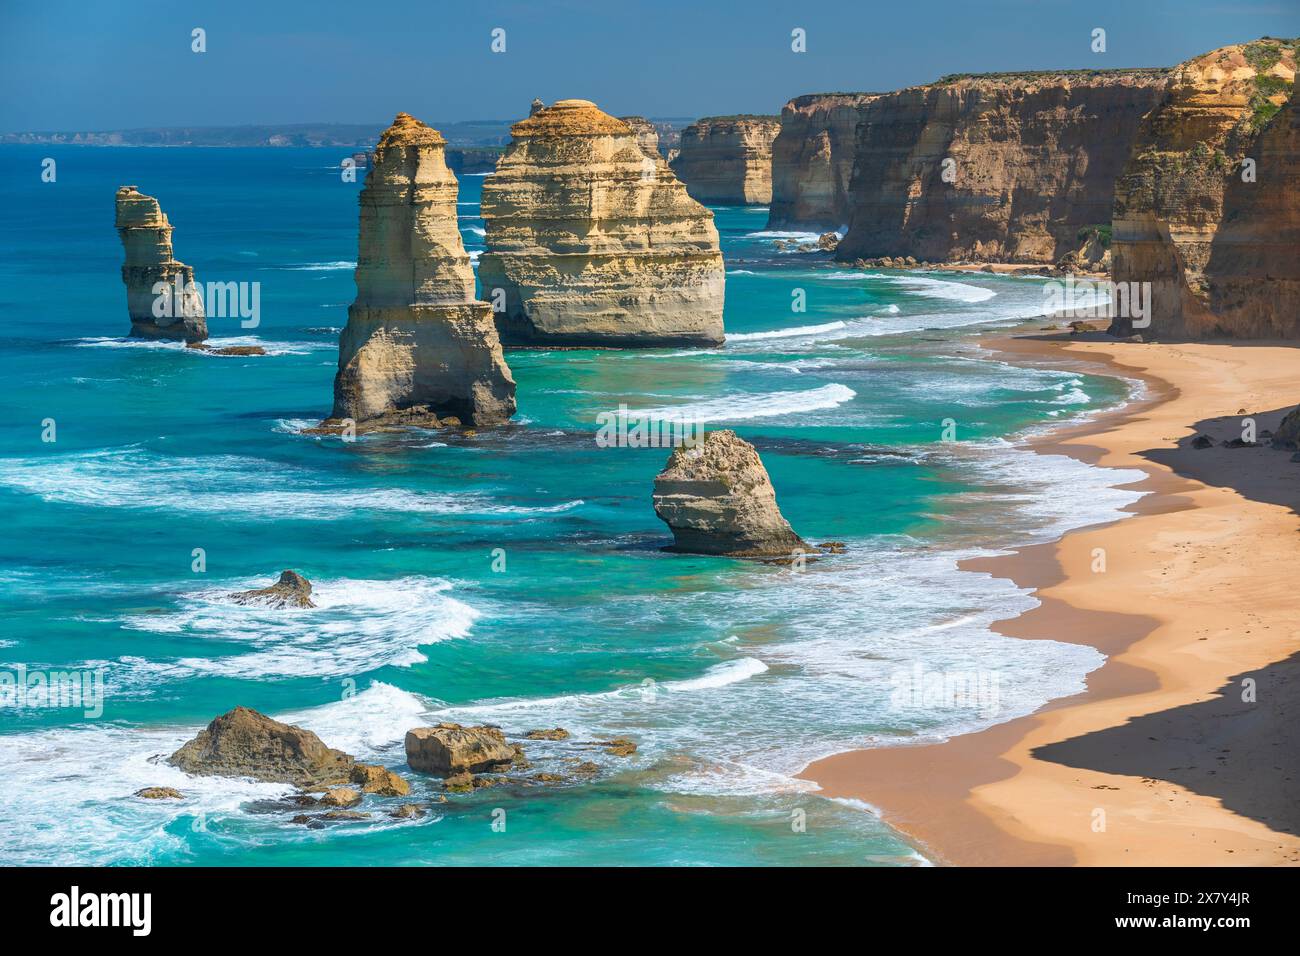 The 'Twelve Apostles' limestone stacks at Port Campbell National Park on the Great Ocean Road in Victoria, Australia. Stock Photo